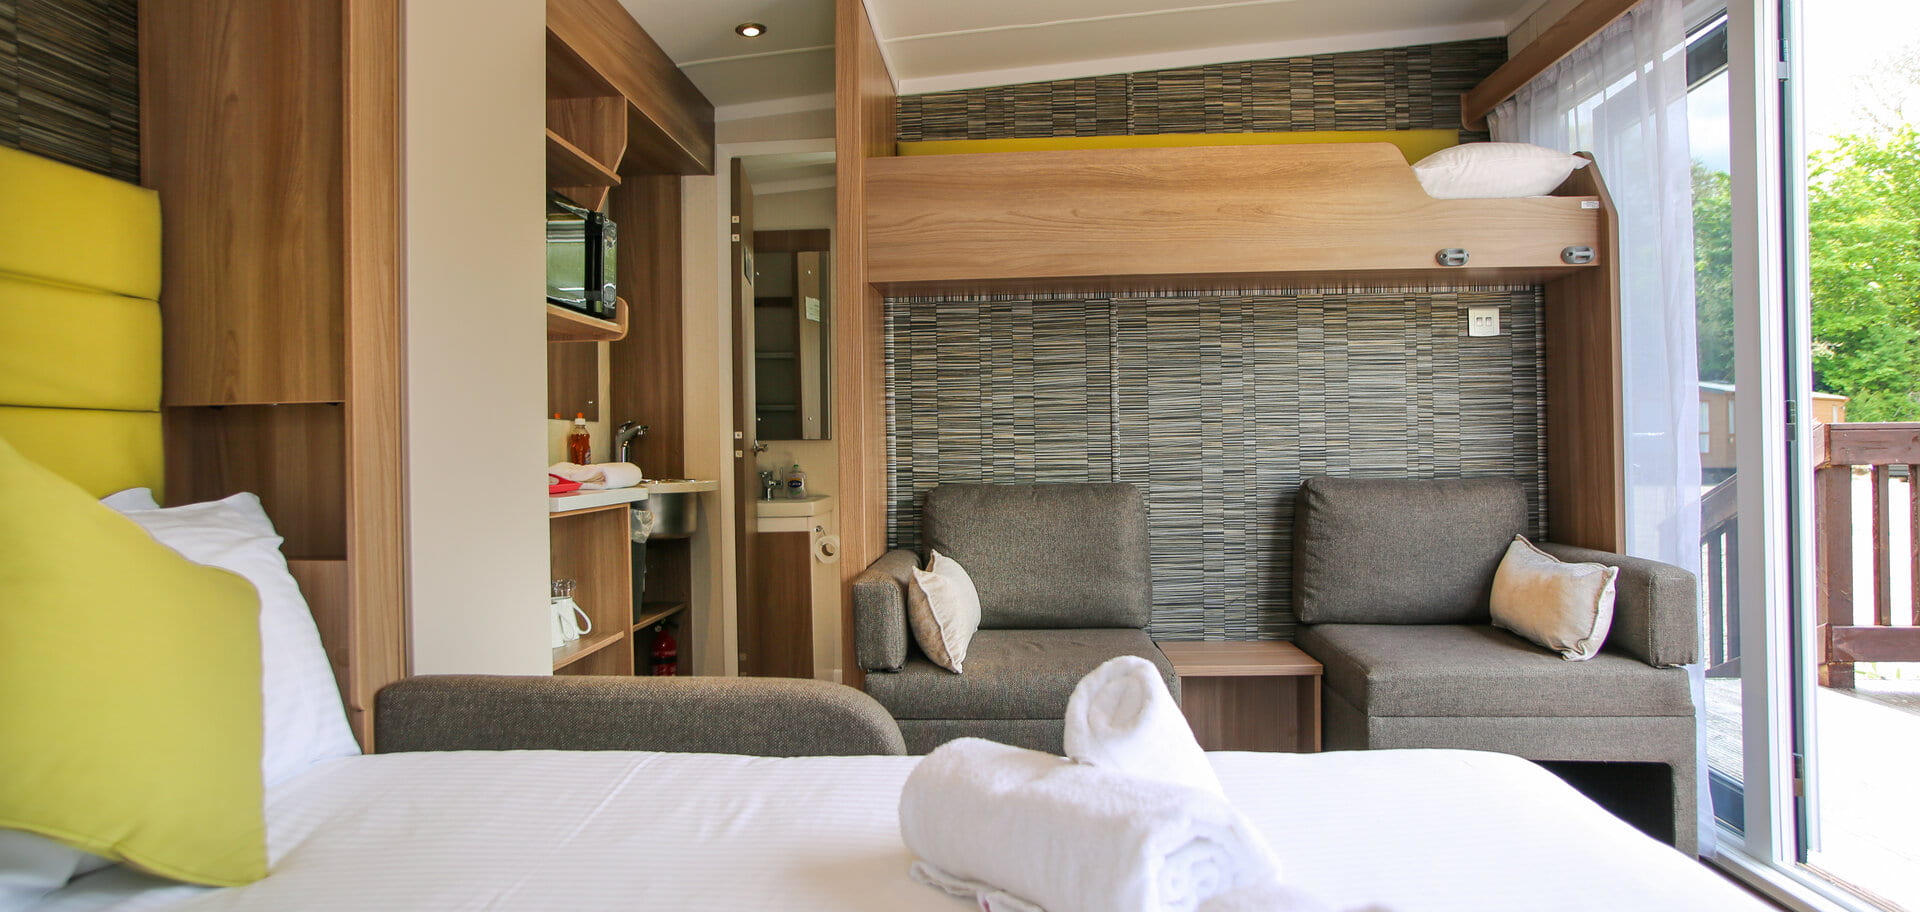 Interior of 4 berth glamping pod- bunk bed and chairs